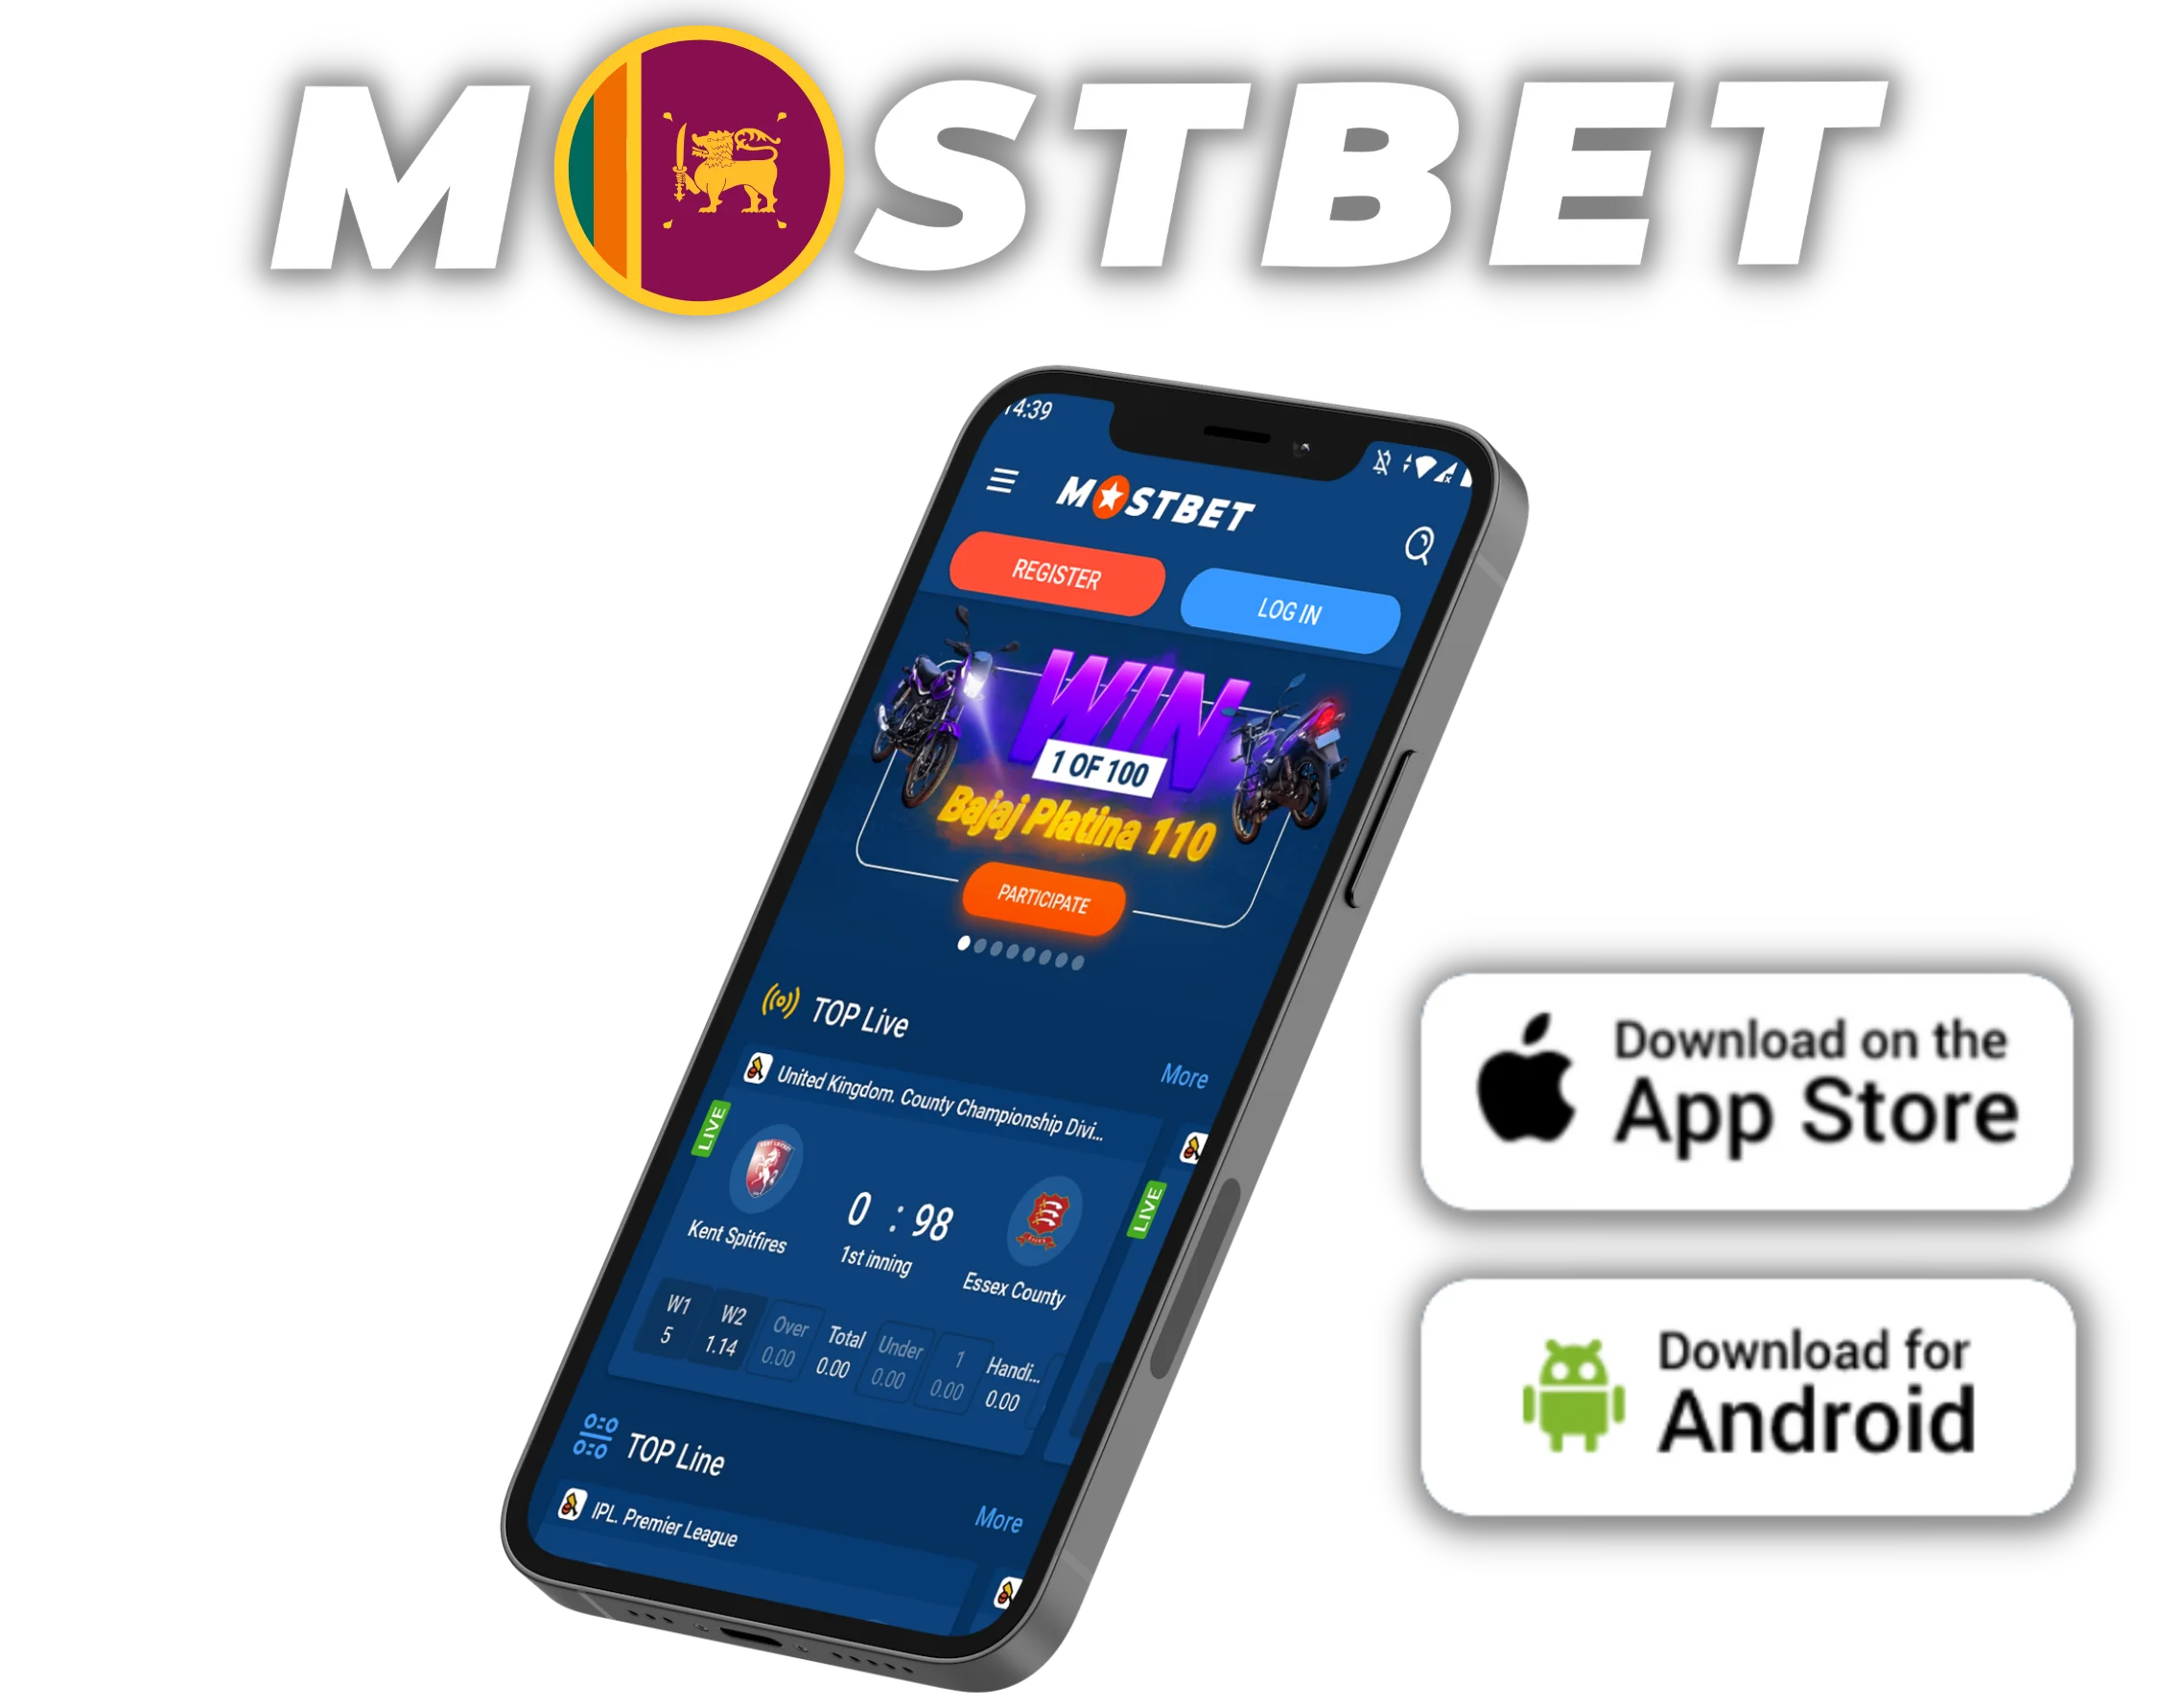 Who is Your Mostbet Betting Company and Casino in Egypt Customer?